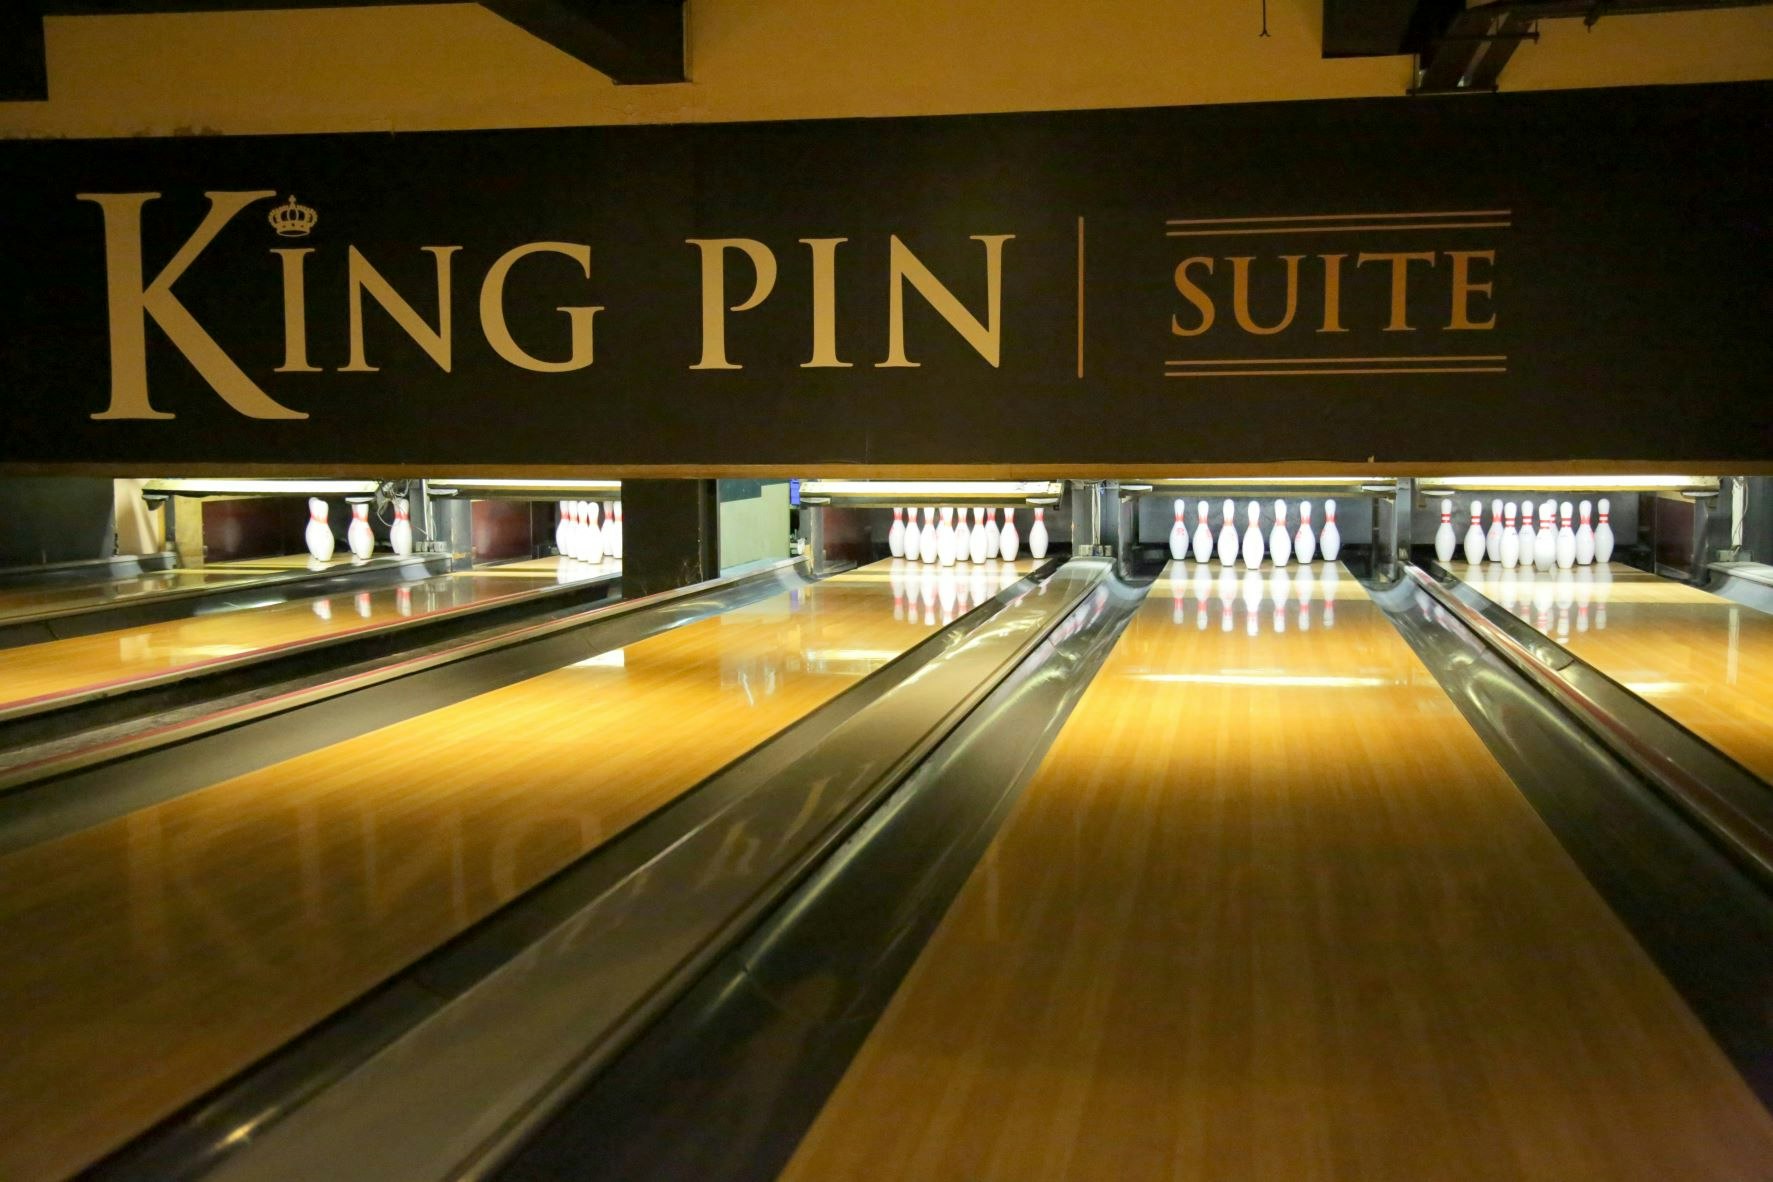 Bloomsbury Bowling Lanes & The Kingpin Suite - The KingPin Suite image 6